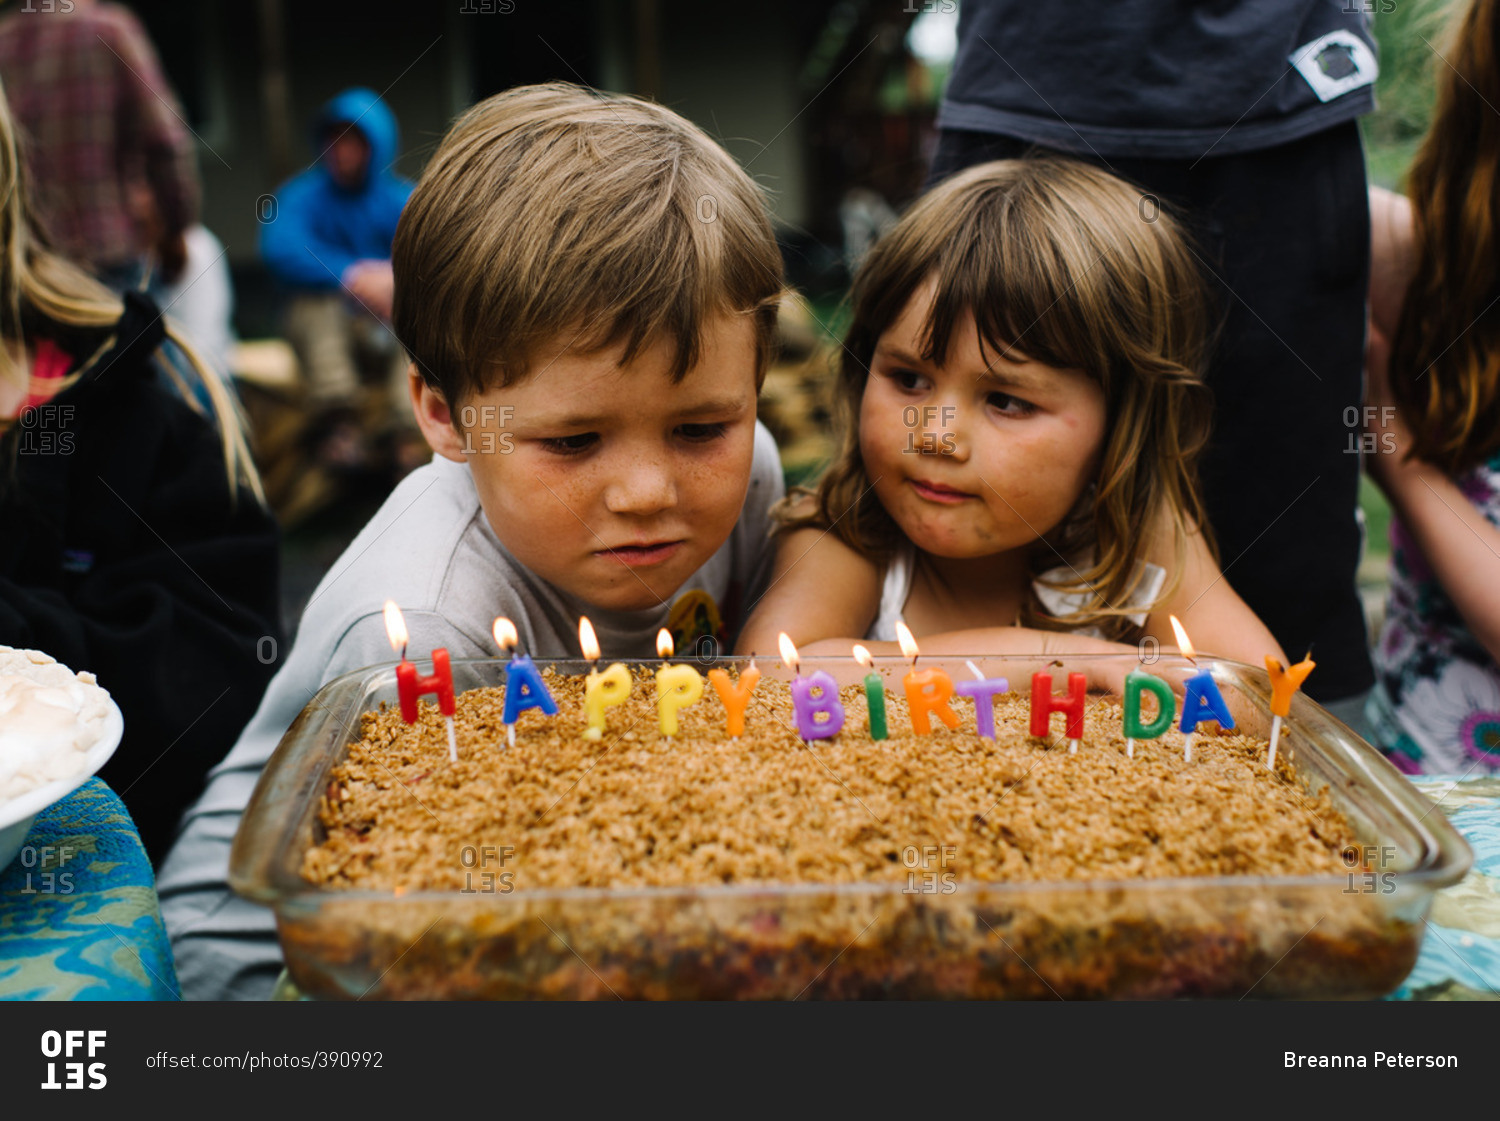 Children at a party looking at a cake that has happy birthday spelled out in candles